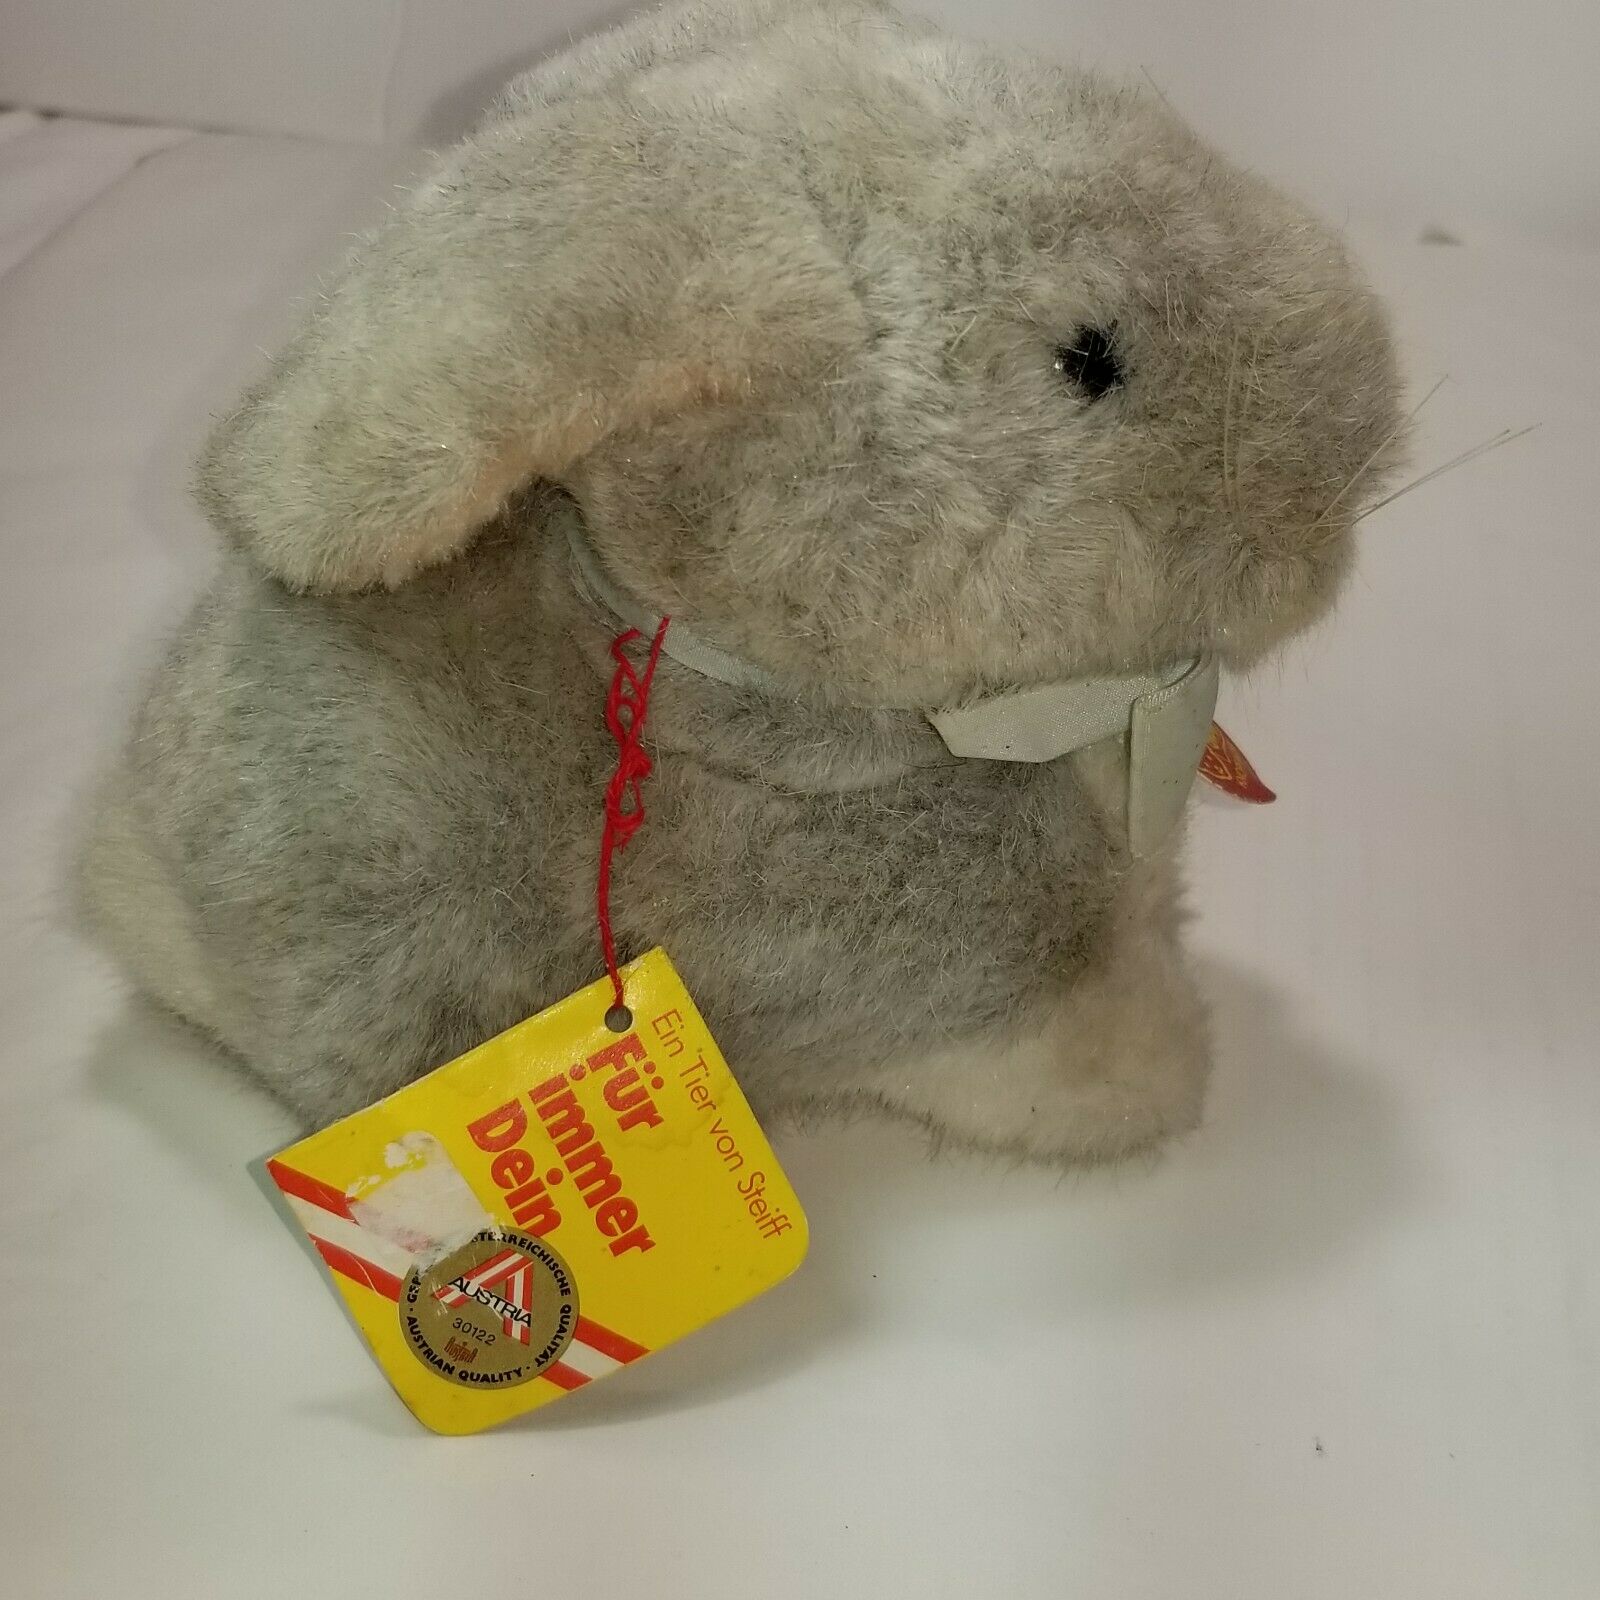 Steiff Gray Snuffy Rabbit Button in Ear 2911.18 Made in Germany